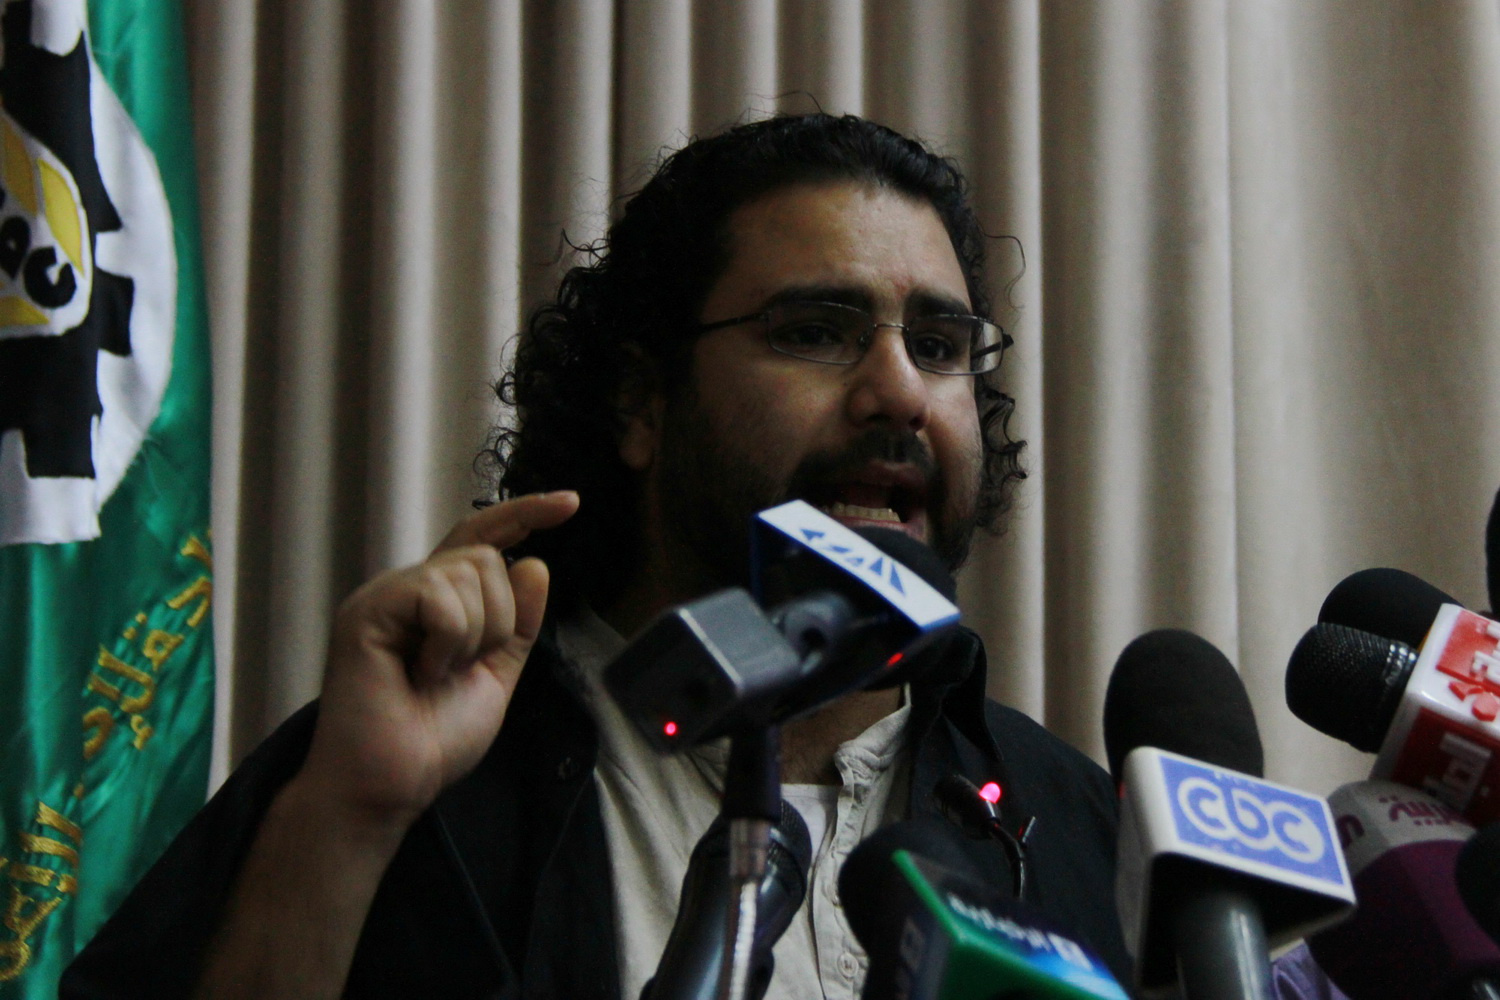 Activist Alaa Abdel Fattah in a press conference on 27 March 2013 (File Photo by Mohamed Omar/DNE)